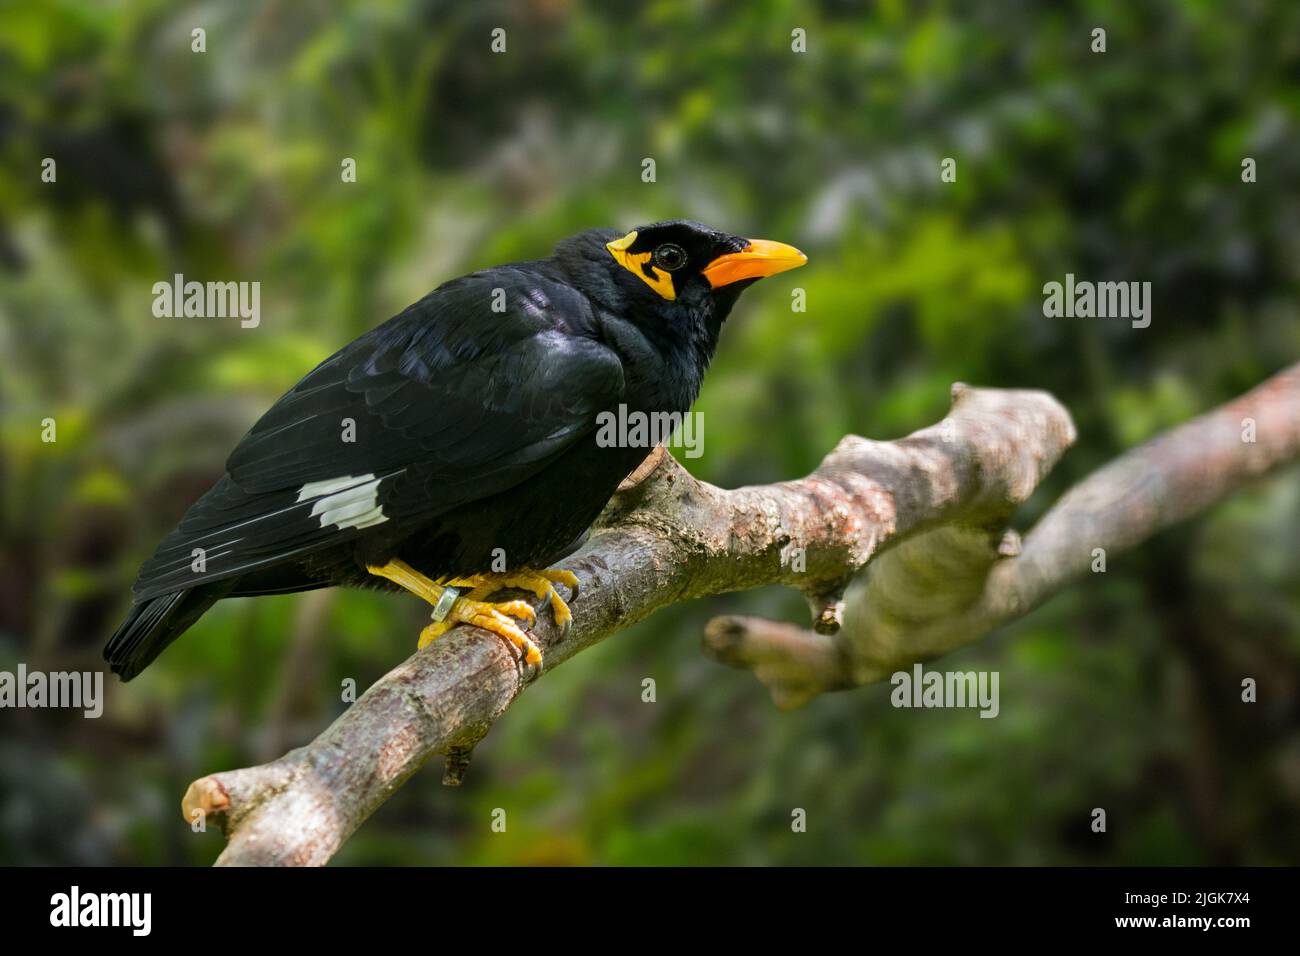 Common hill myna bird (Gracula religiosa / Gracula indica) native to the hill regions of South Asia and Southeast Asia Stock Photo